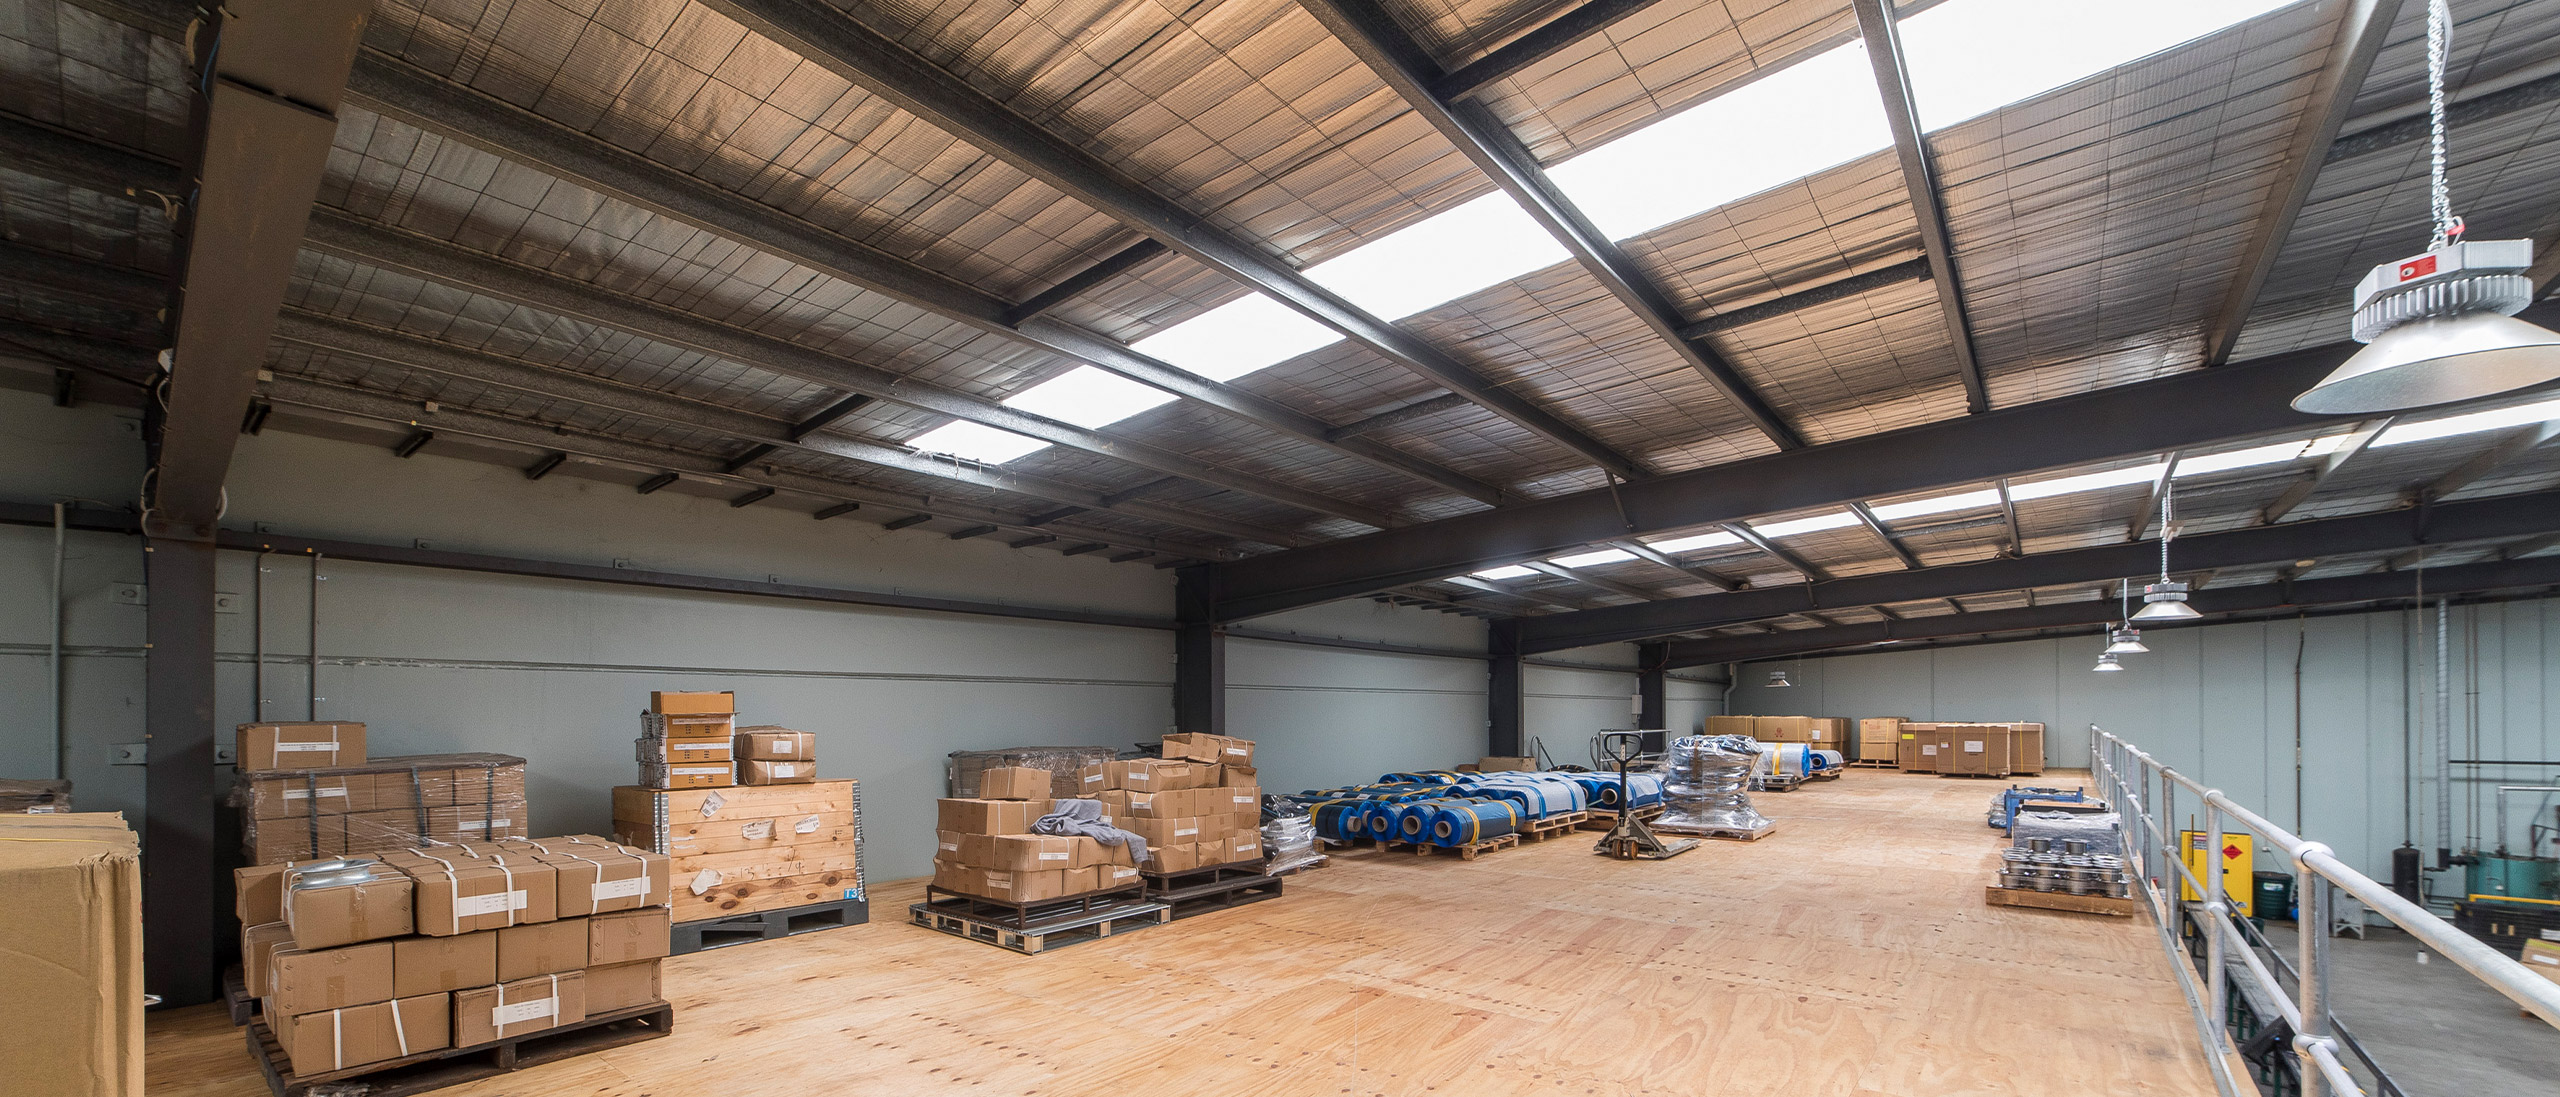 Warehouse Design for Efficiency